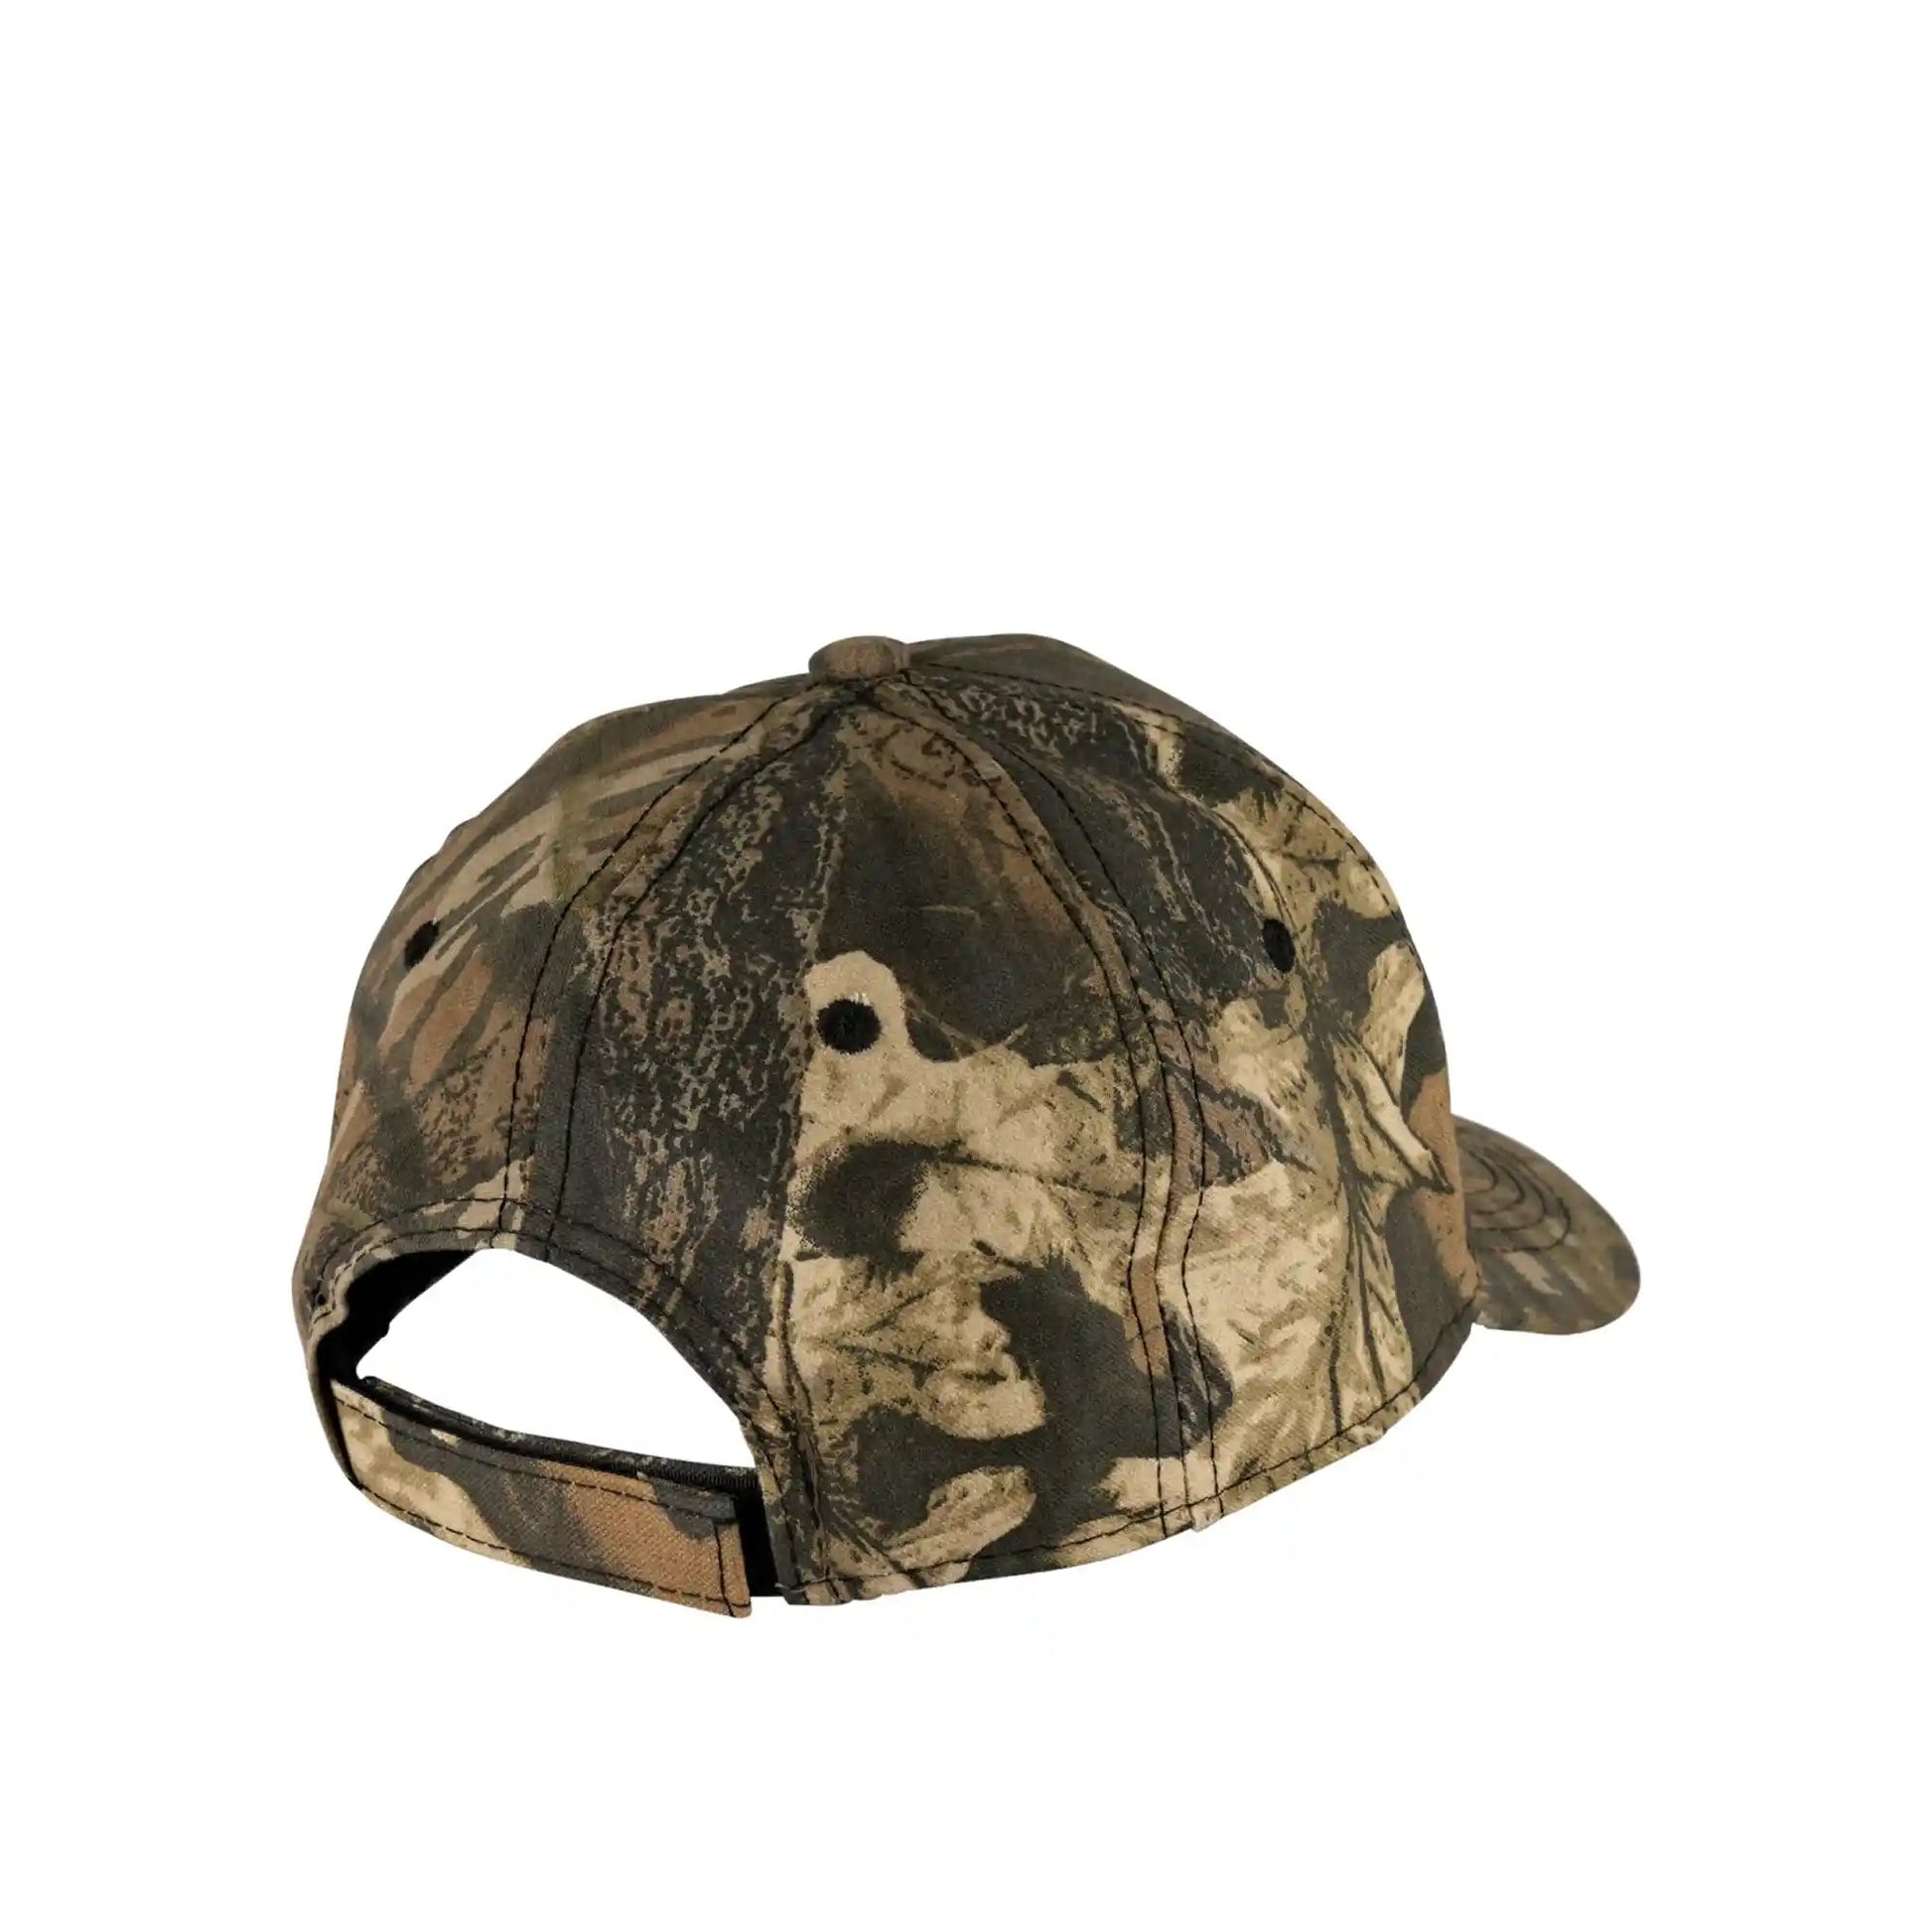 Welcome Vamp Embroidered Hat, camo - Tiki Room Skateboards - 2